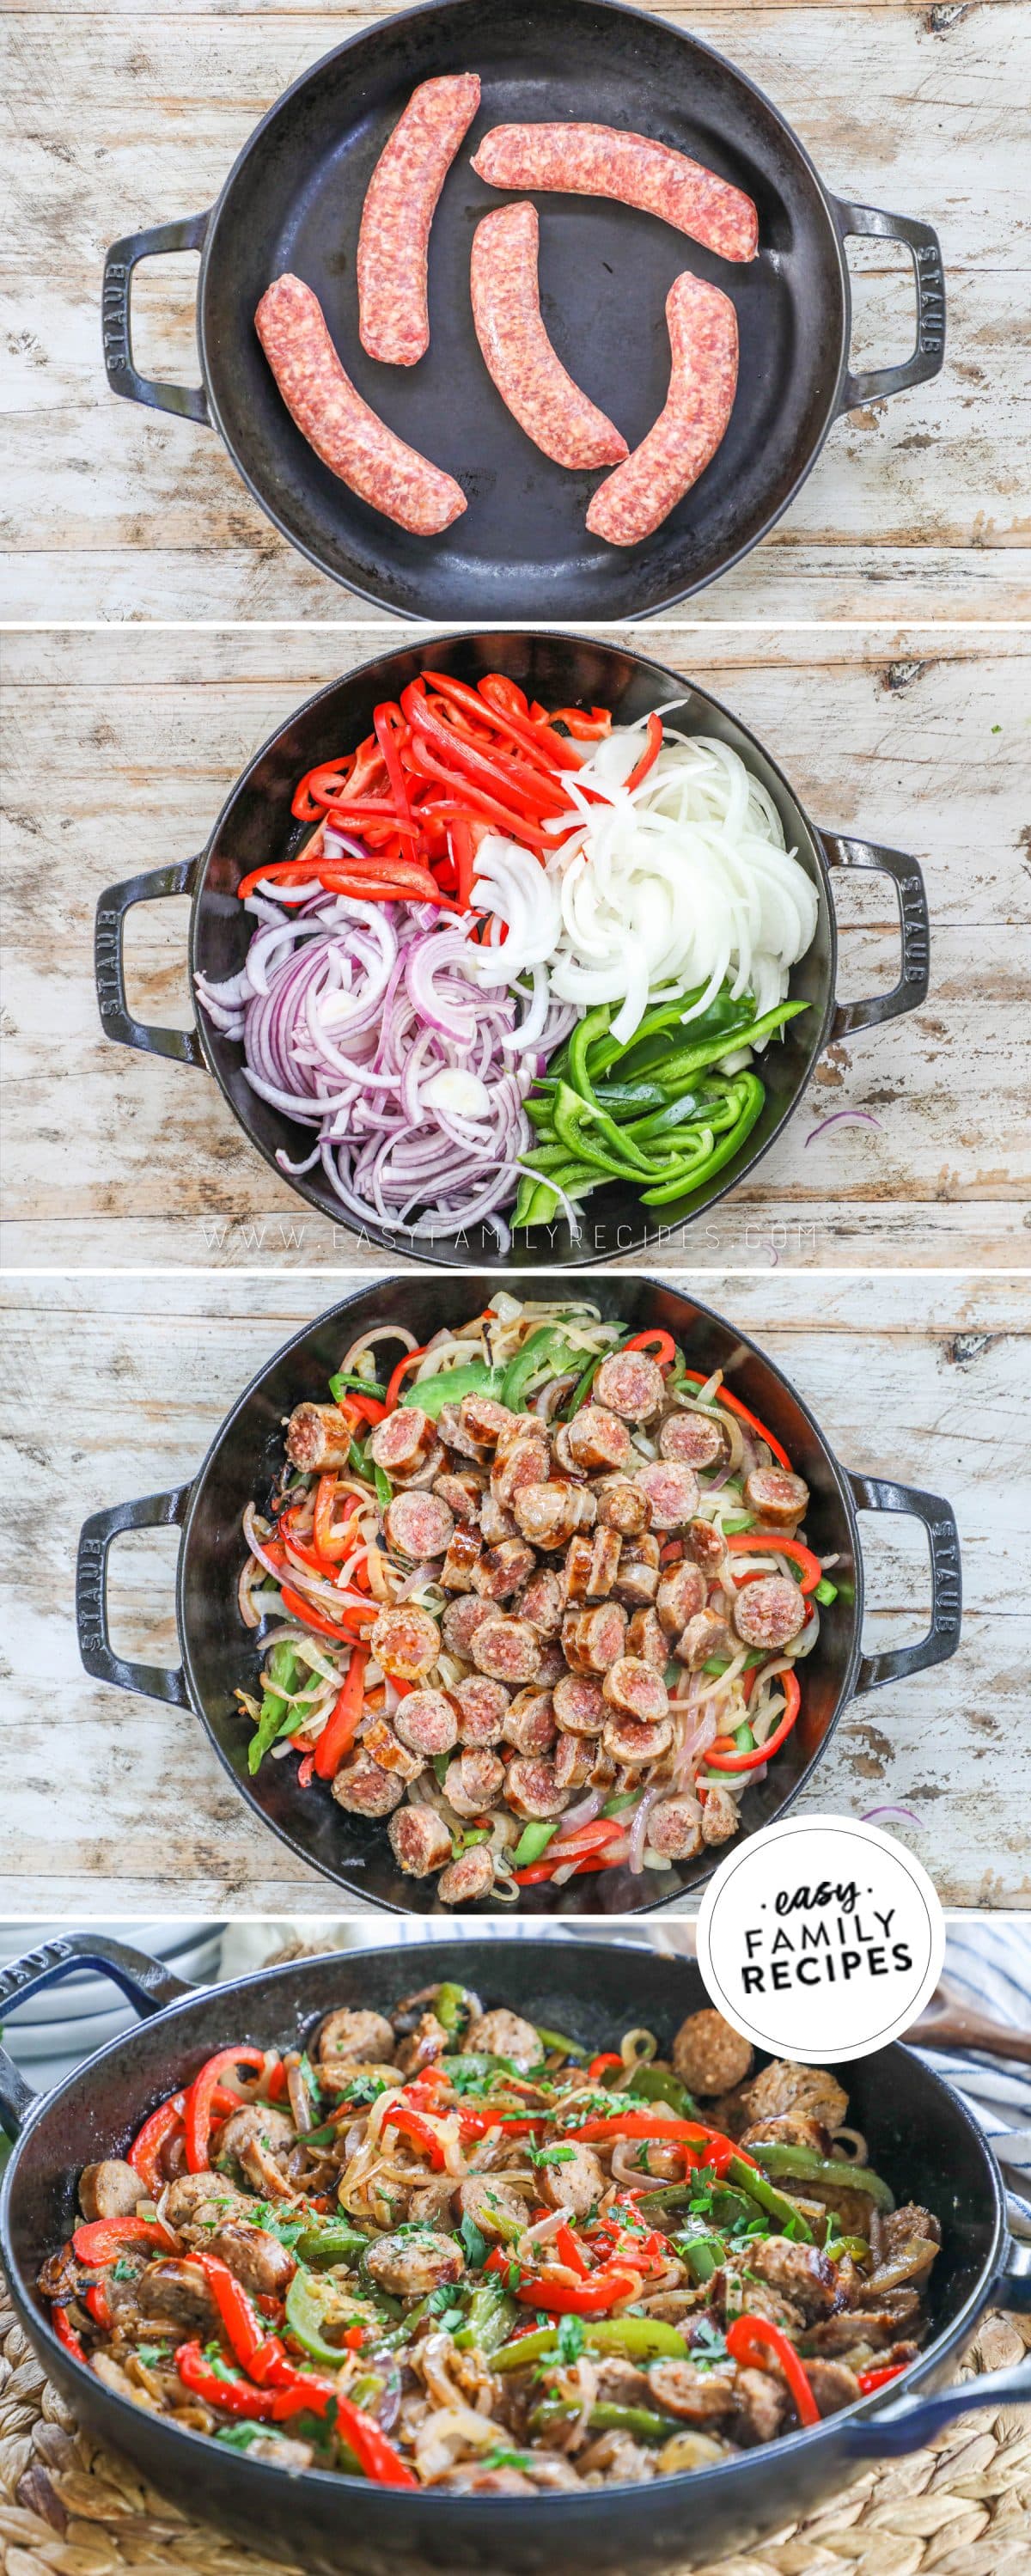 How to make Sausage and Peppers: 1) cook the sausage, 2) add the vegetables, 3) simmer everything together, 4) serve